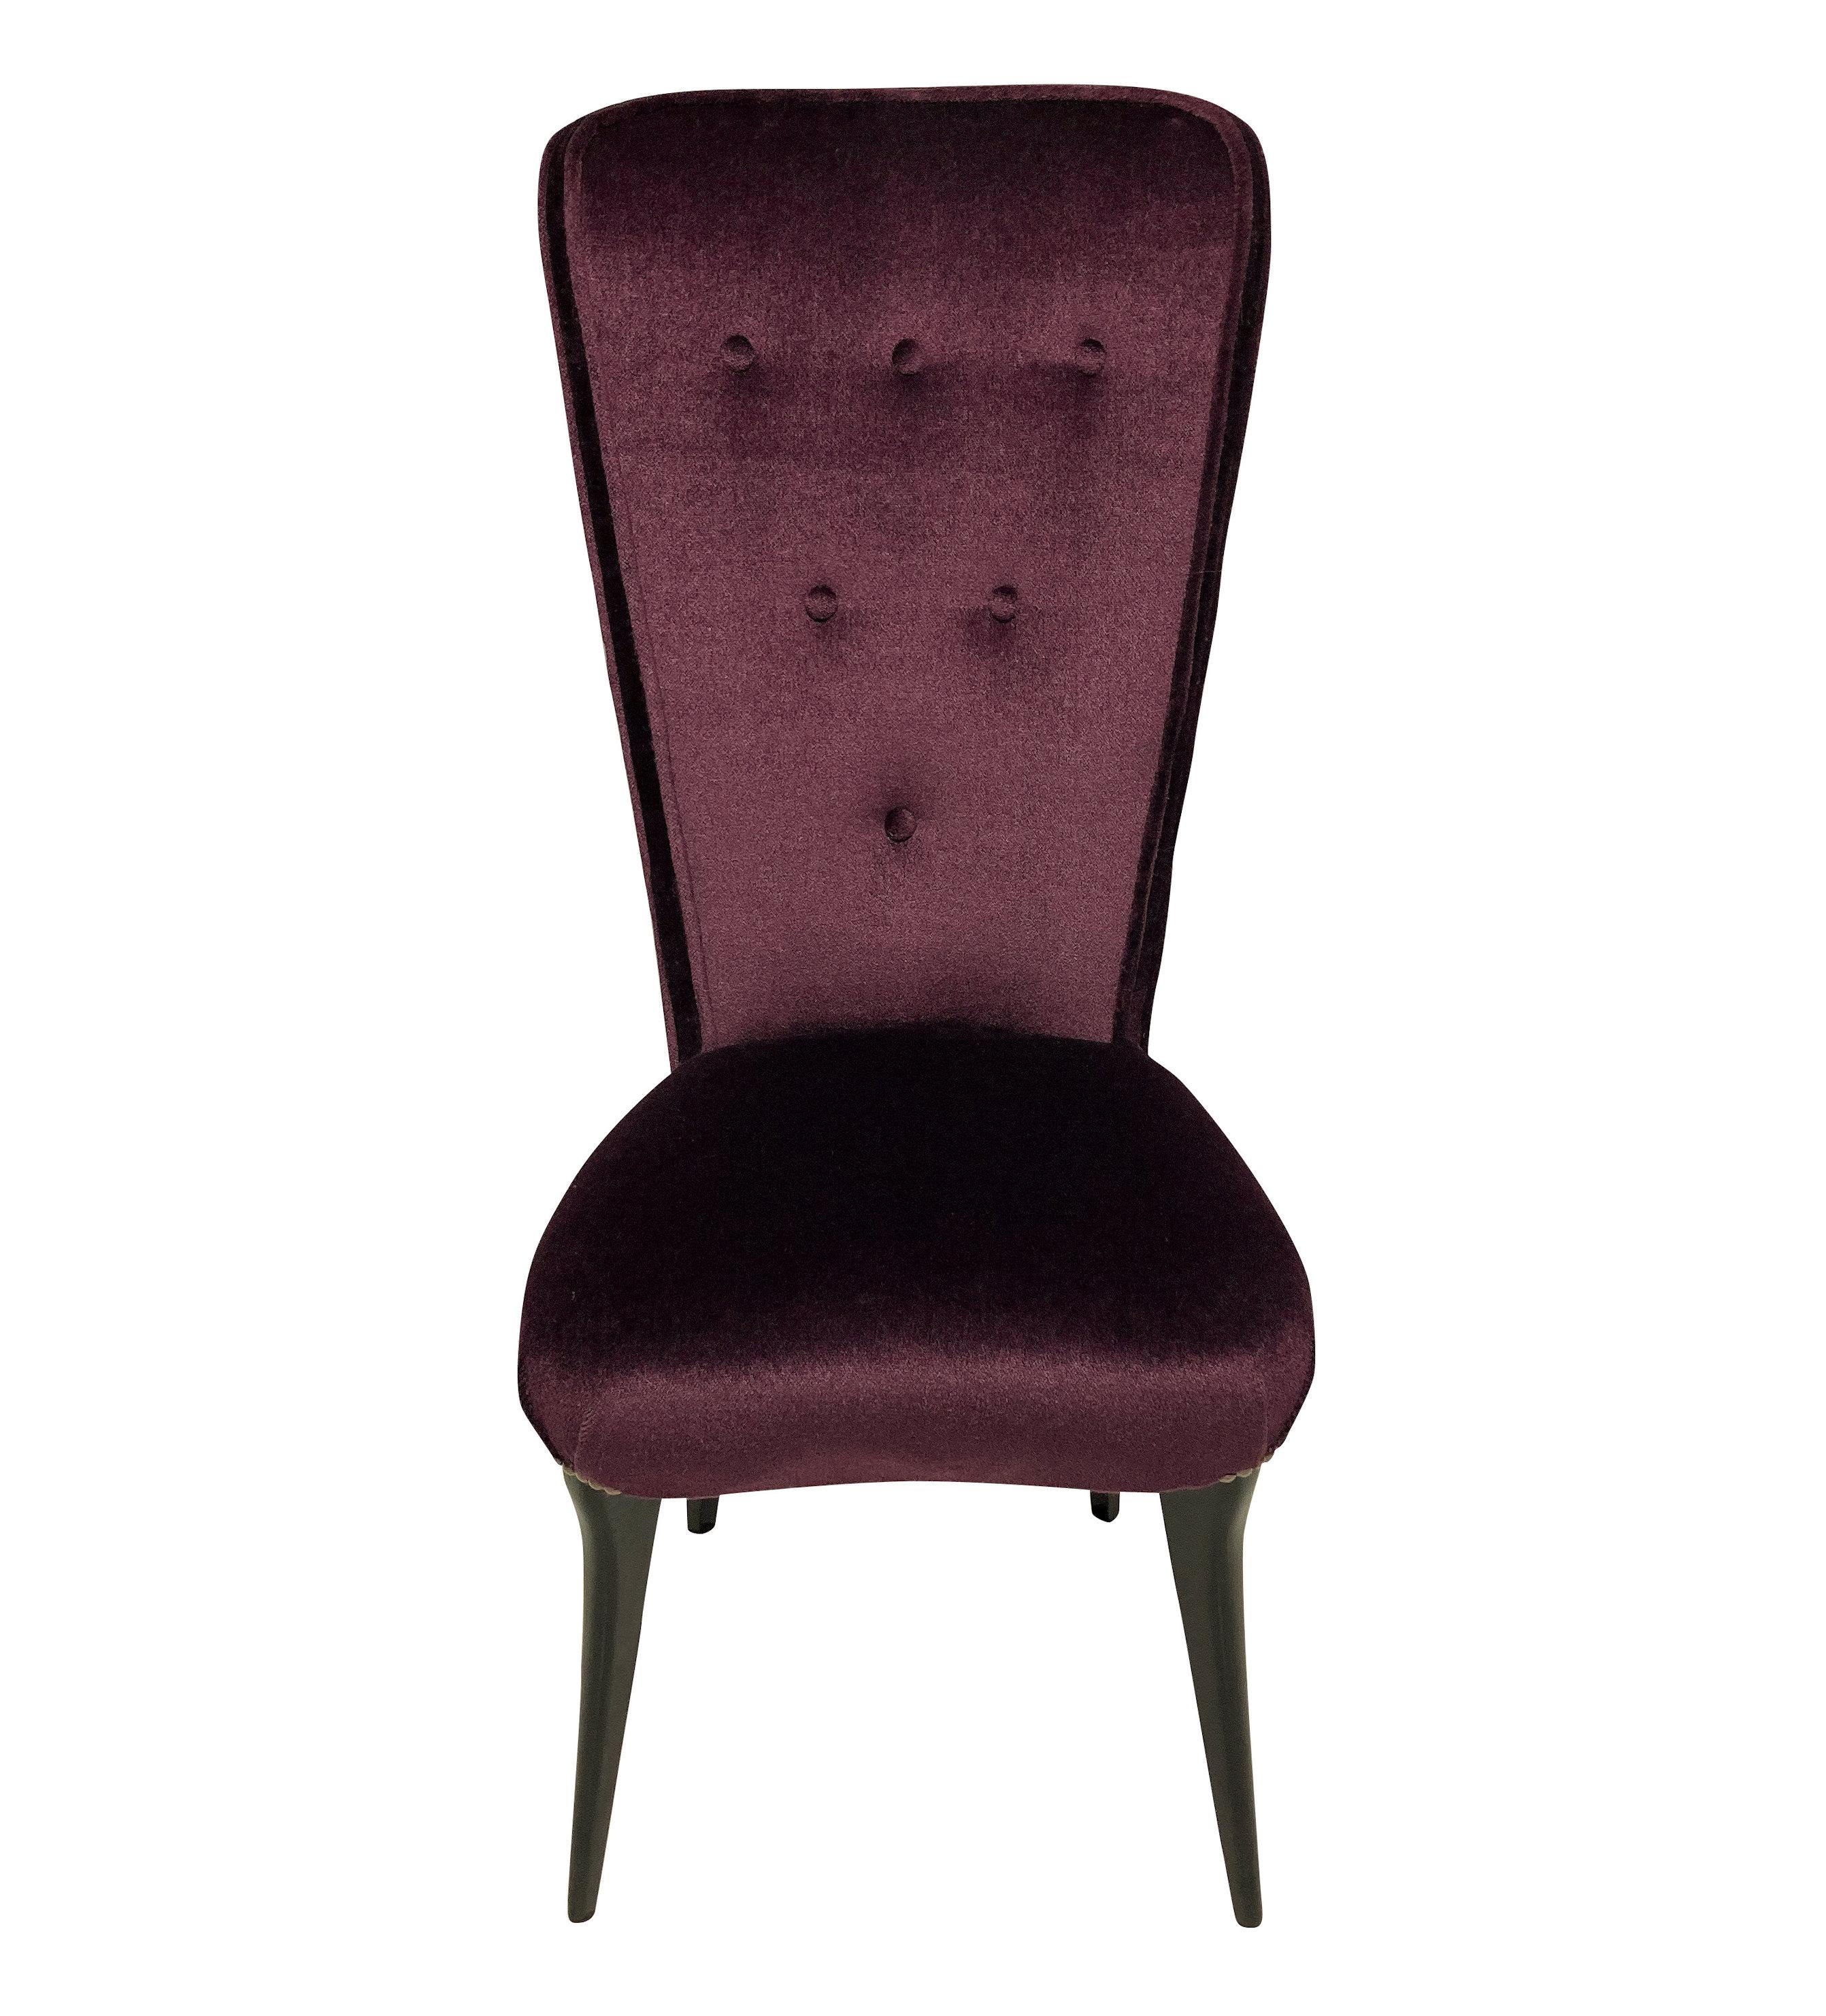 A pair of stylish Italian hall chairs with high buttoned backs and ebonized legs. Newly upholstered in aubergine mohair velvet.